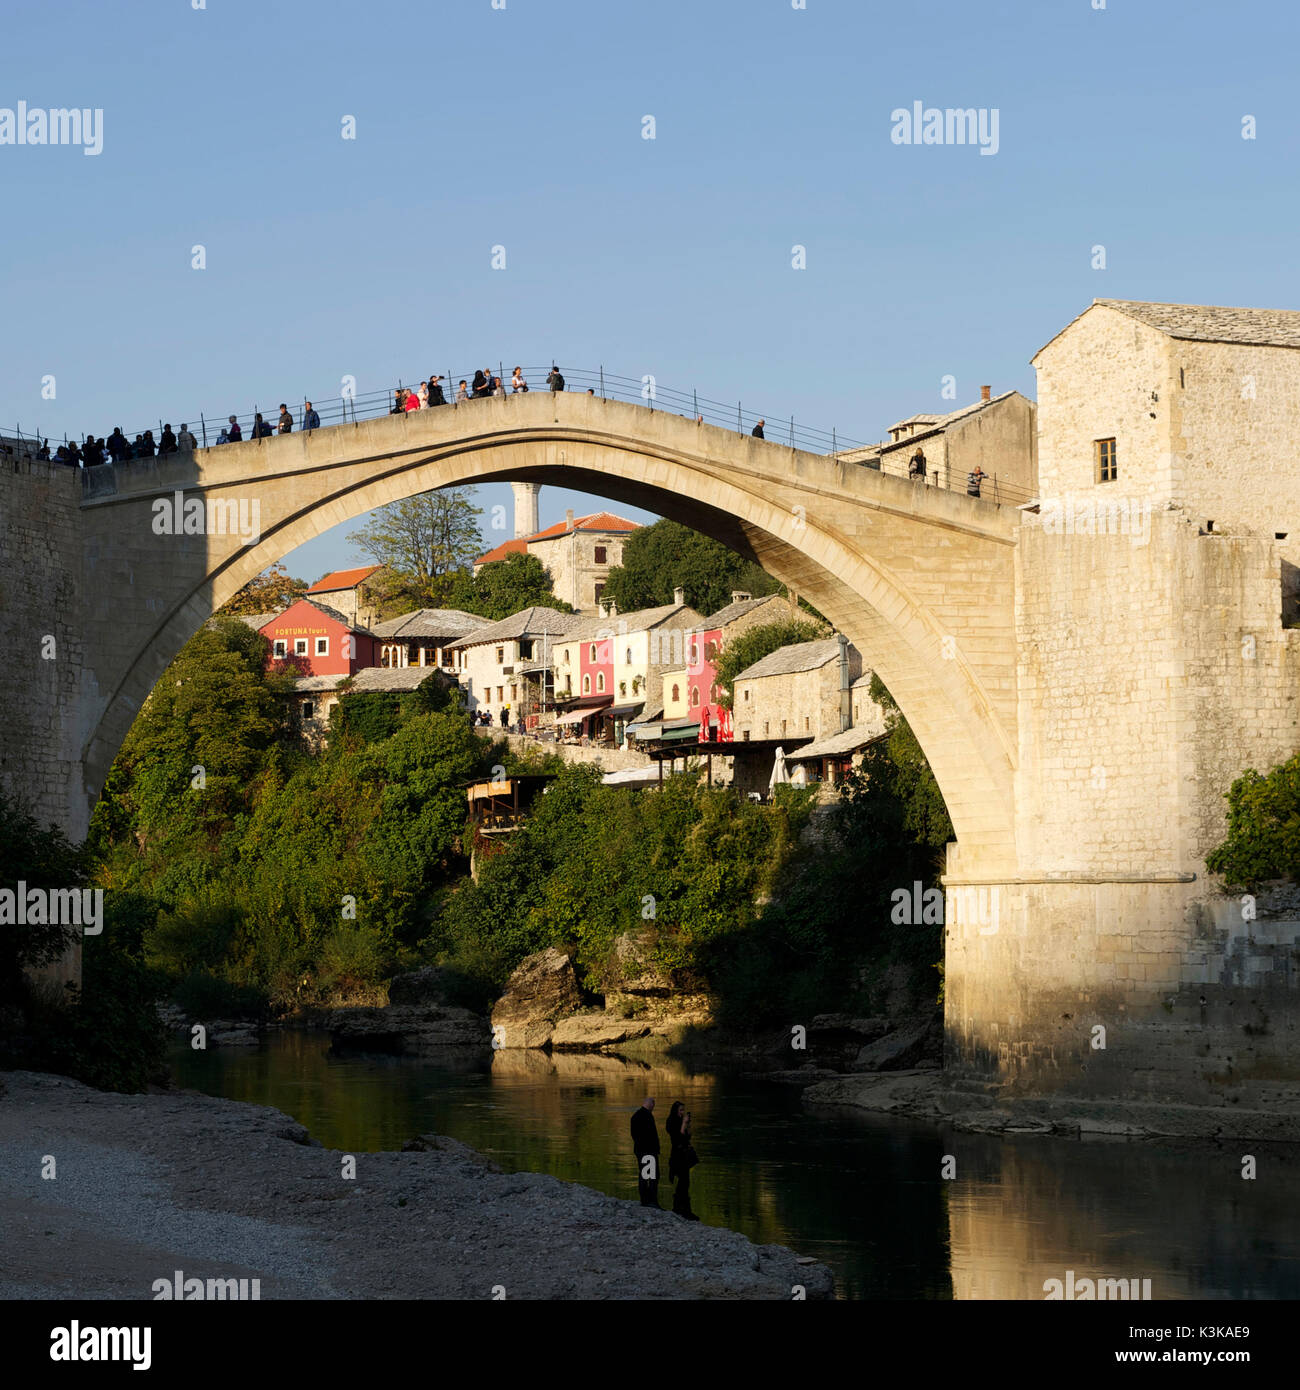 Bosnia and Herzegovina, Mostar, listed as World Heritage by UNESCO, Old Bridge (Stari most) Stock Photo